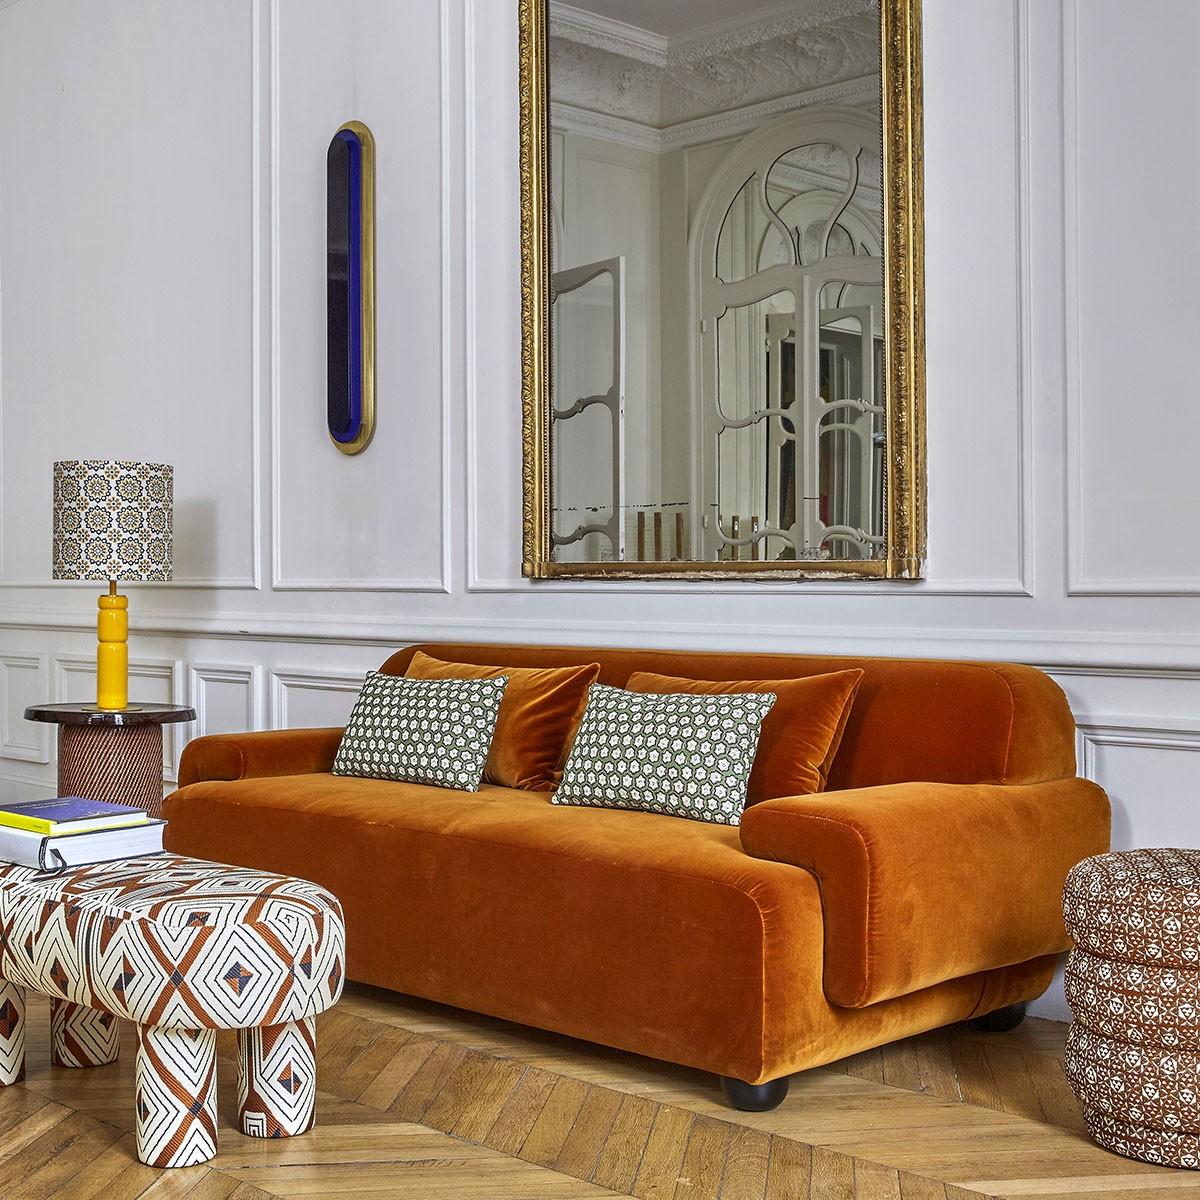 Popus editions lena 3 seater sofa in amber athena loop yarn upholstery.

It looks like it's straight out of a movie, with its generous curves and wide armrests. It is a real invitation to spend long Sundays with the family, comfortably seated in